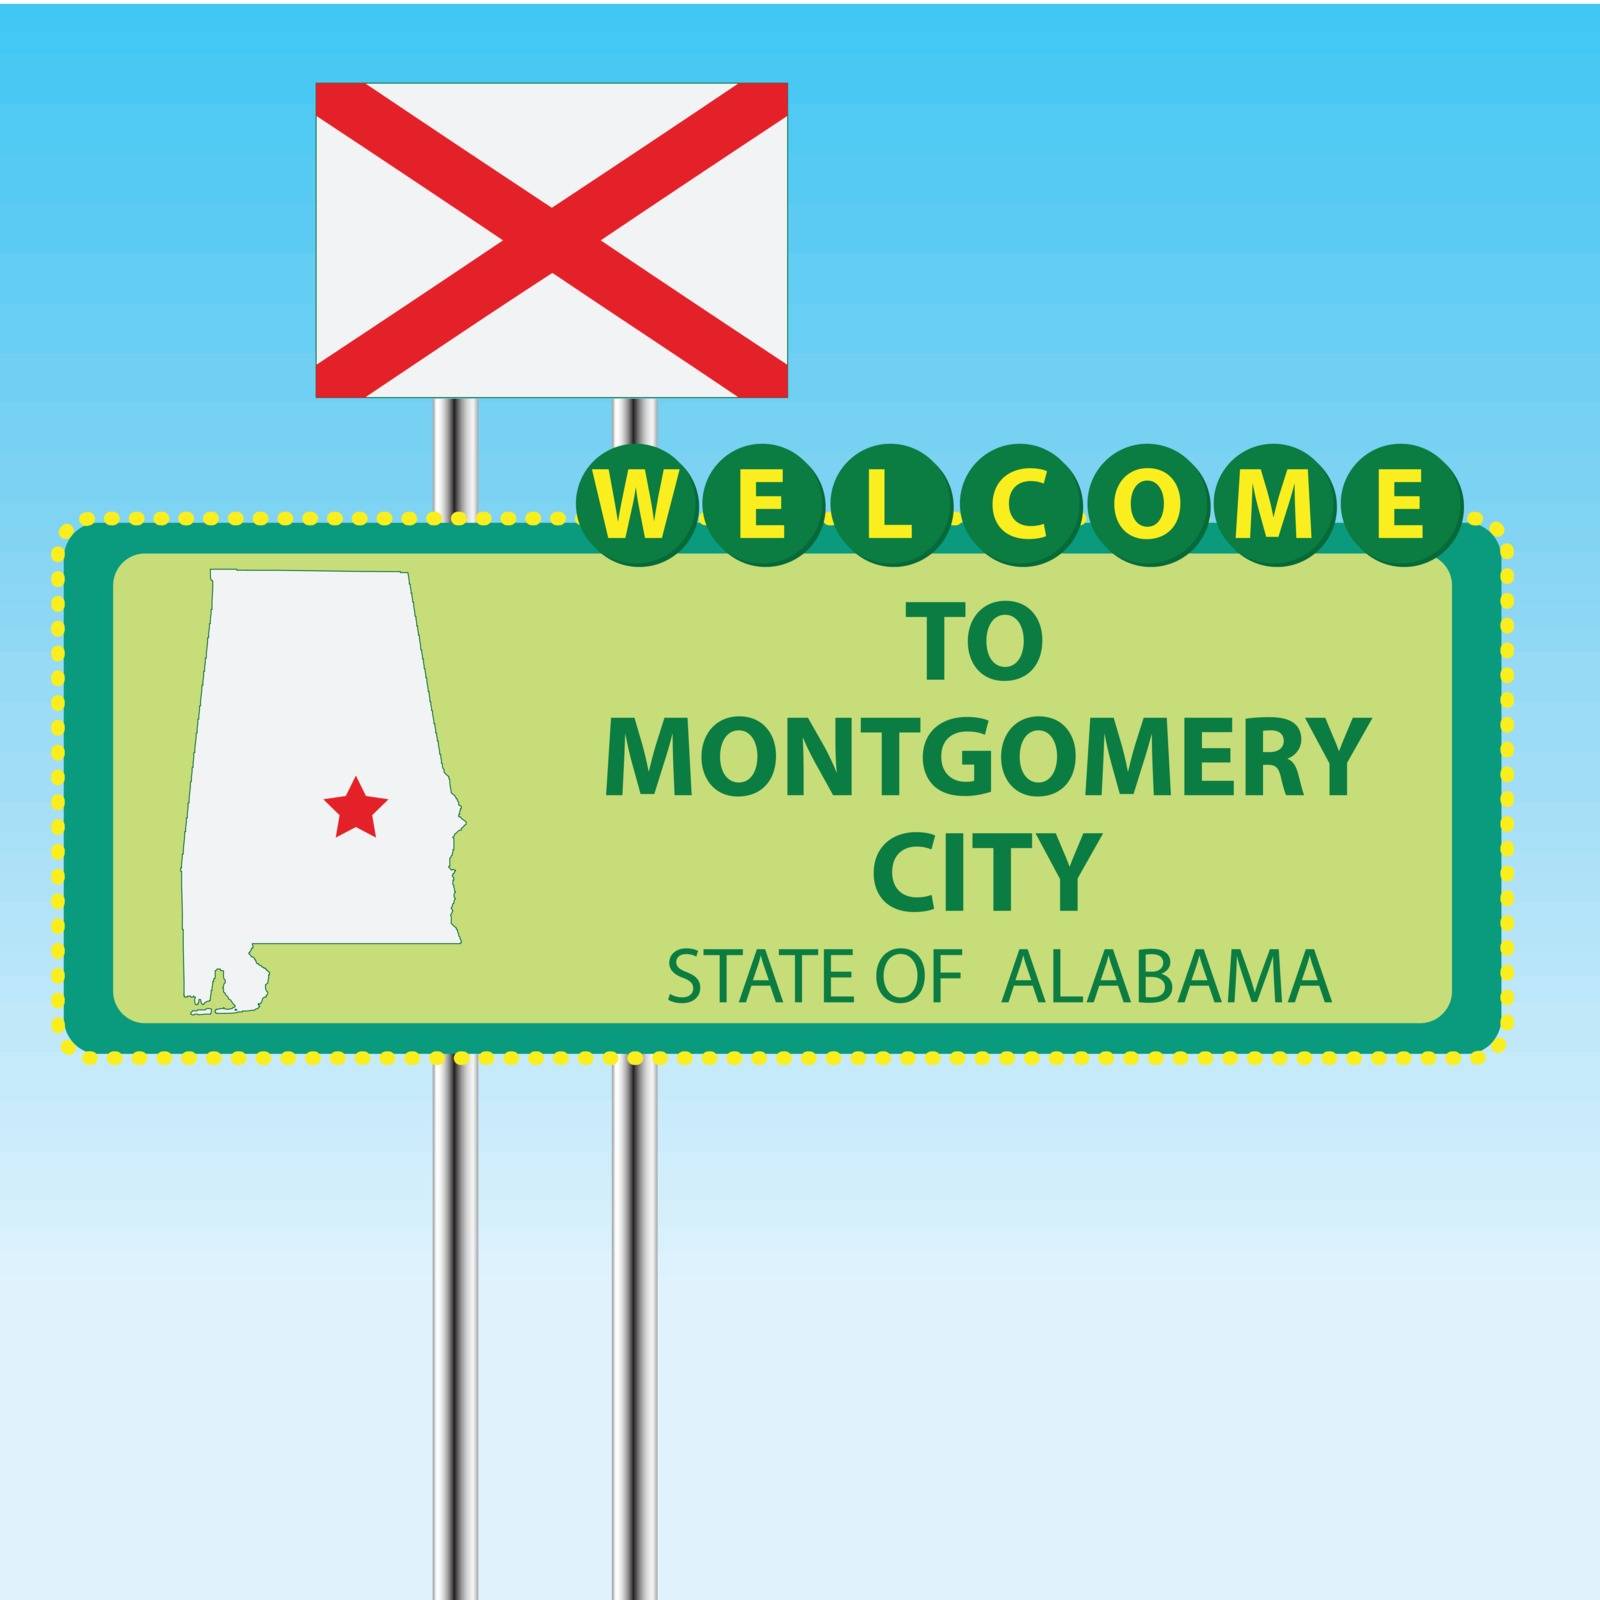 Stand Welcome to Montgomery City State of Alabama. Vector illustration.